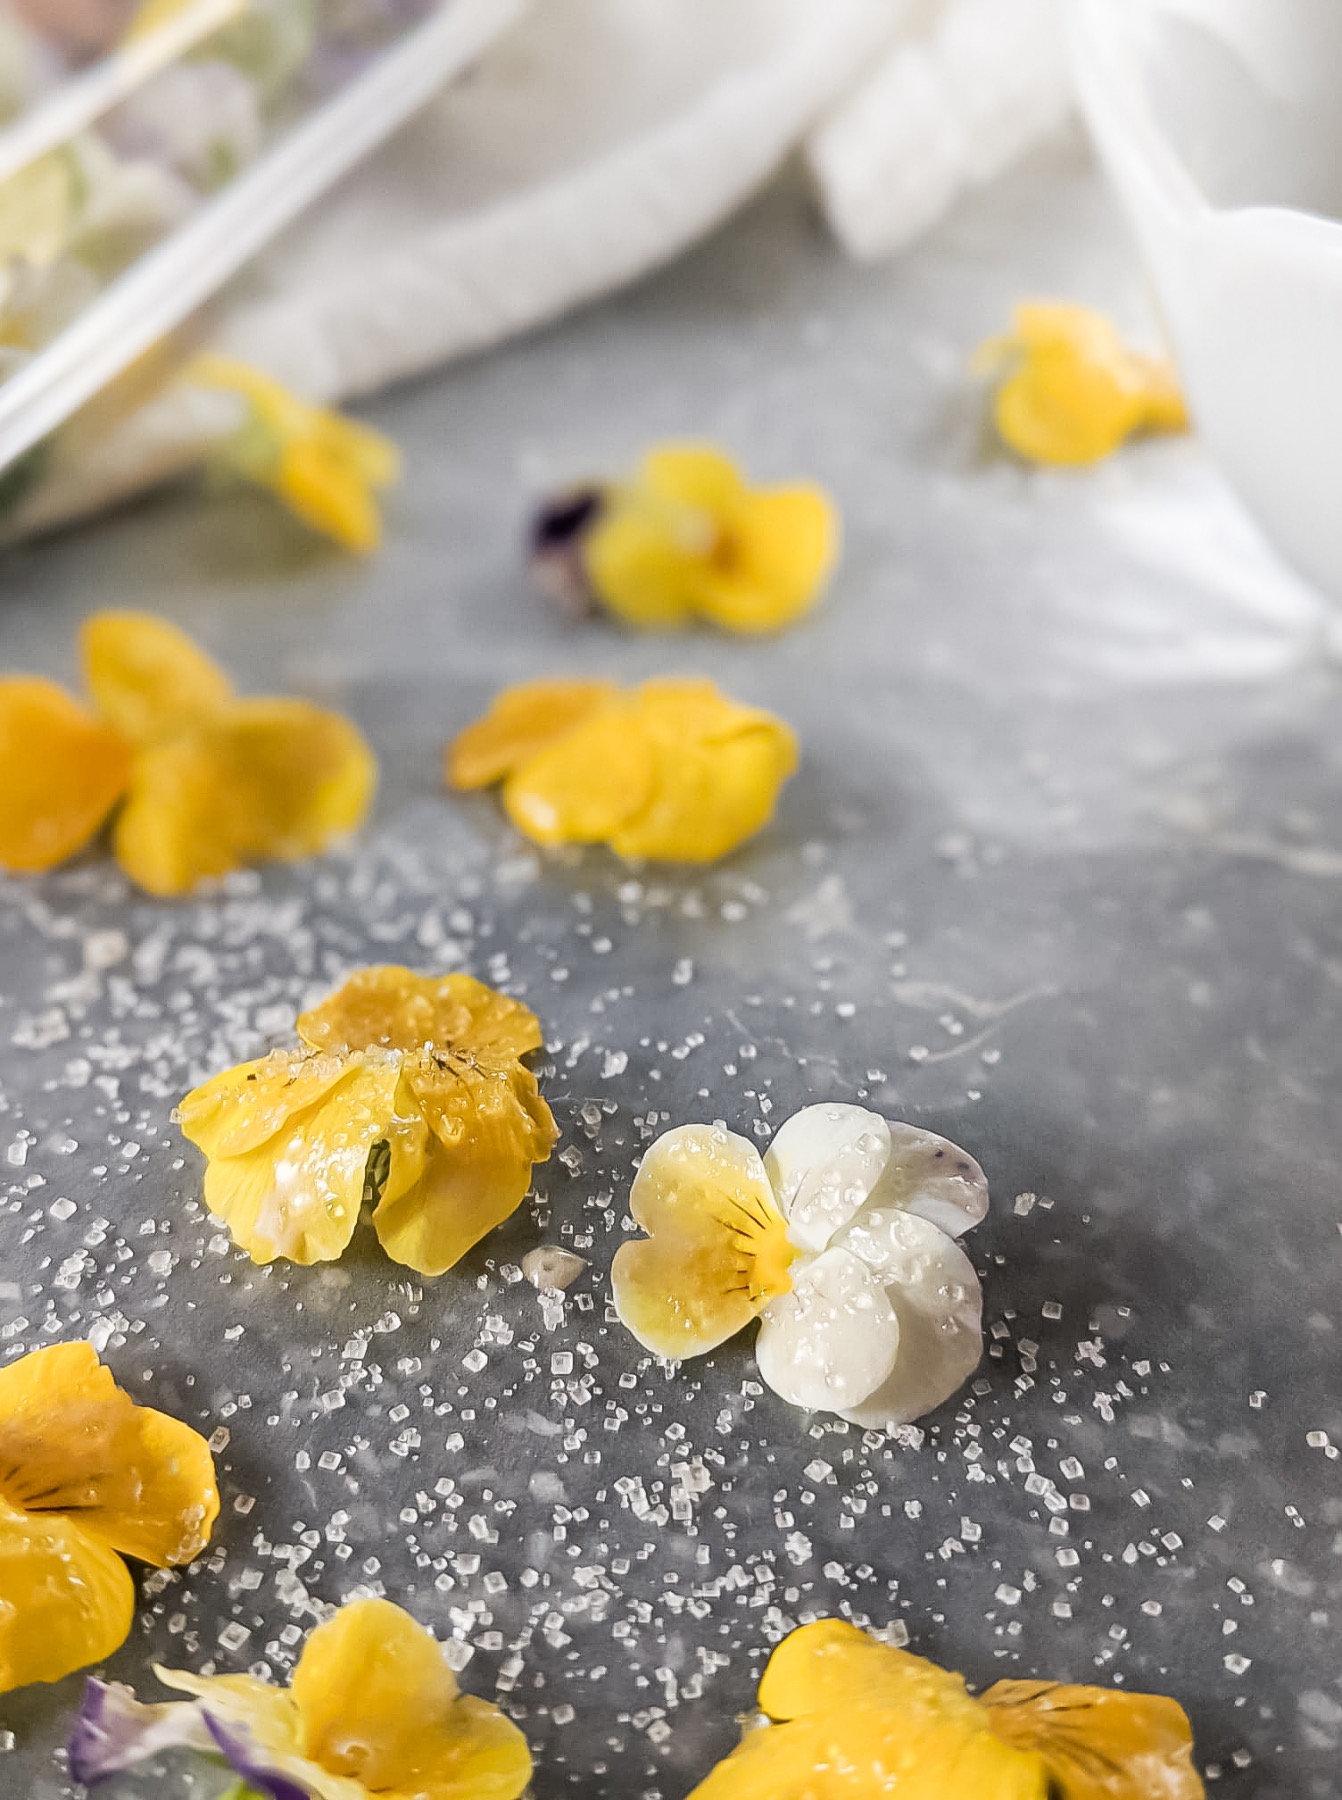 dried edible candied flowers recipe pop shop america